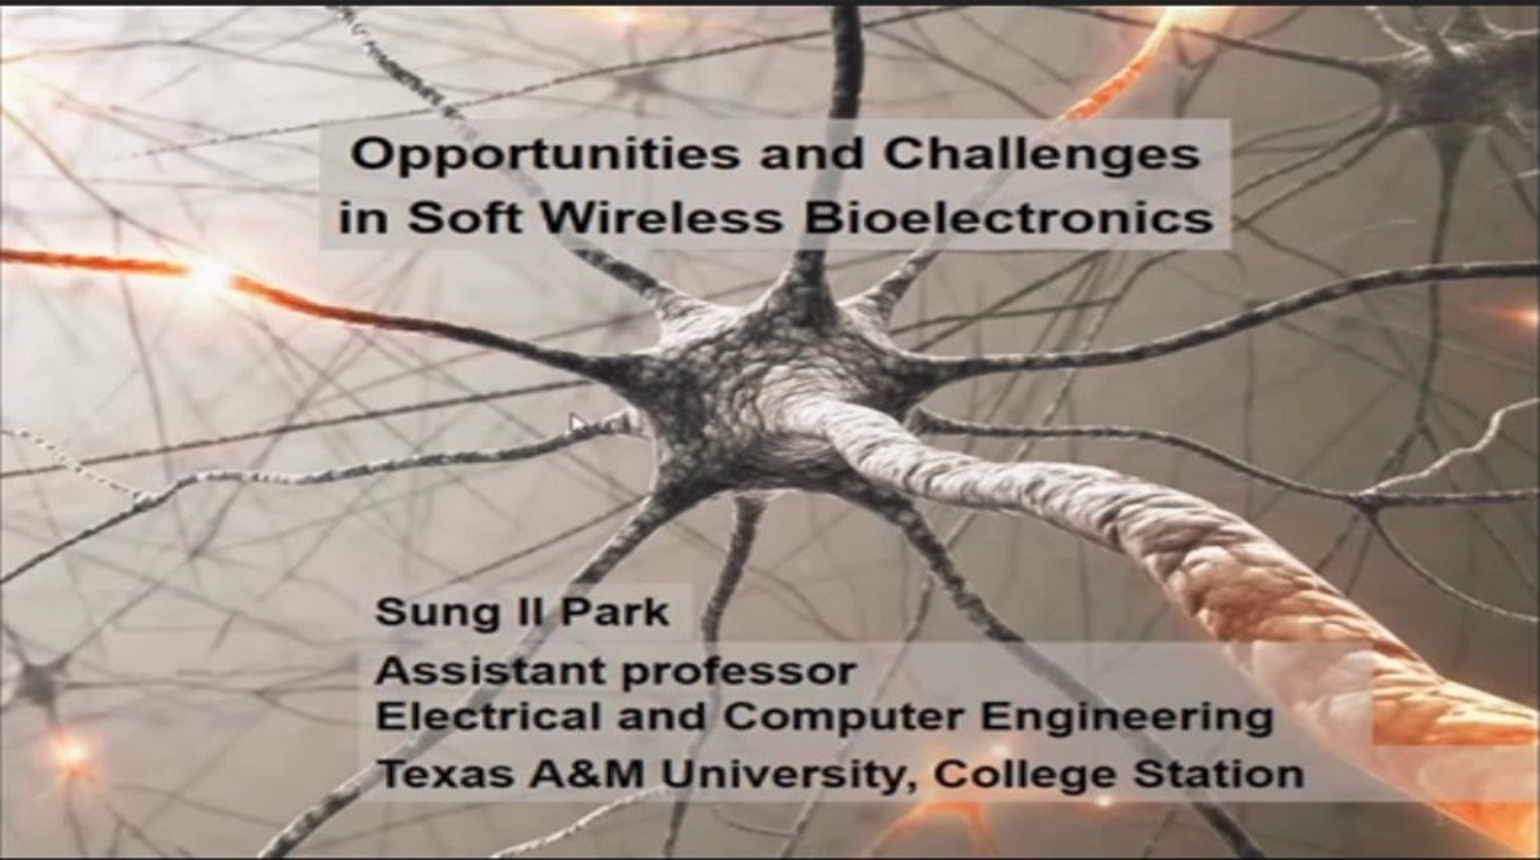 Opportunities and Challenges in Soft Wireless Bioelectronics